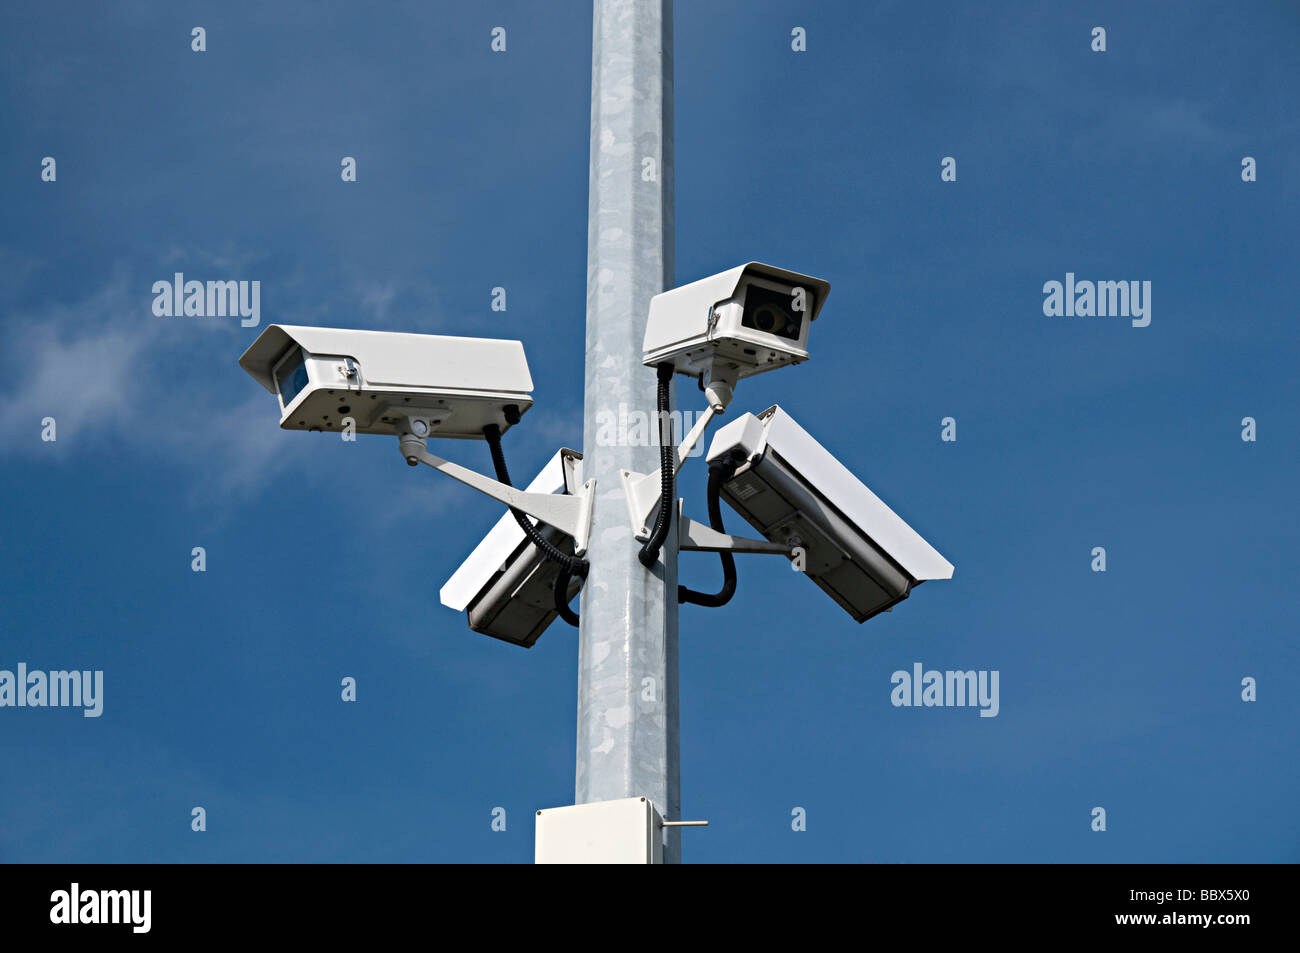 cctv security camera in a car park in the uk Stock Photo